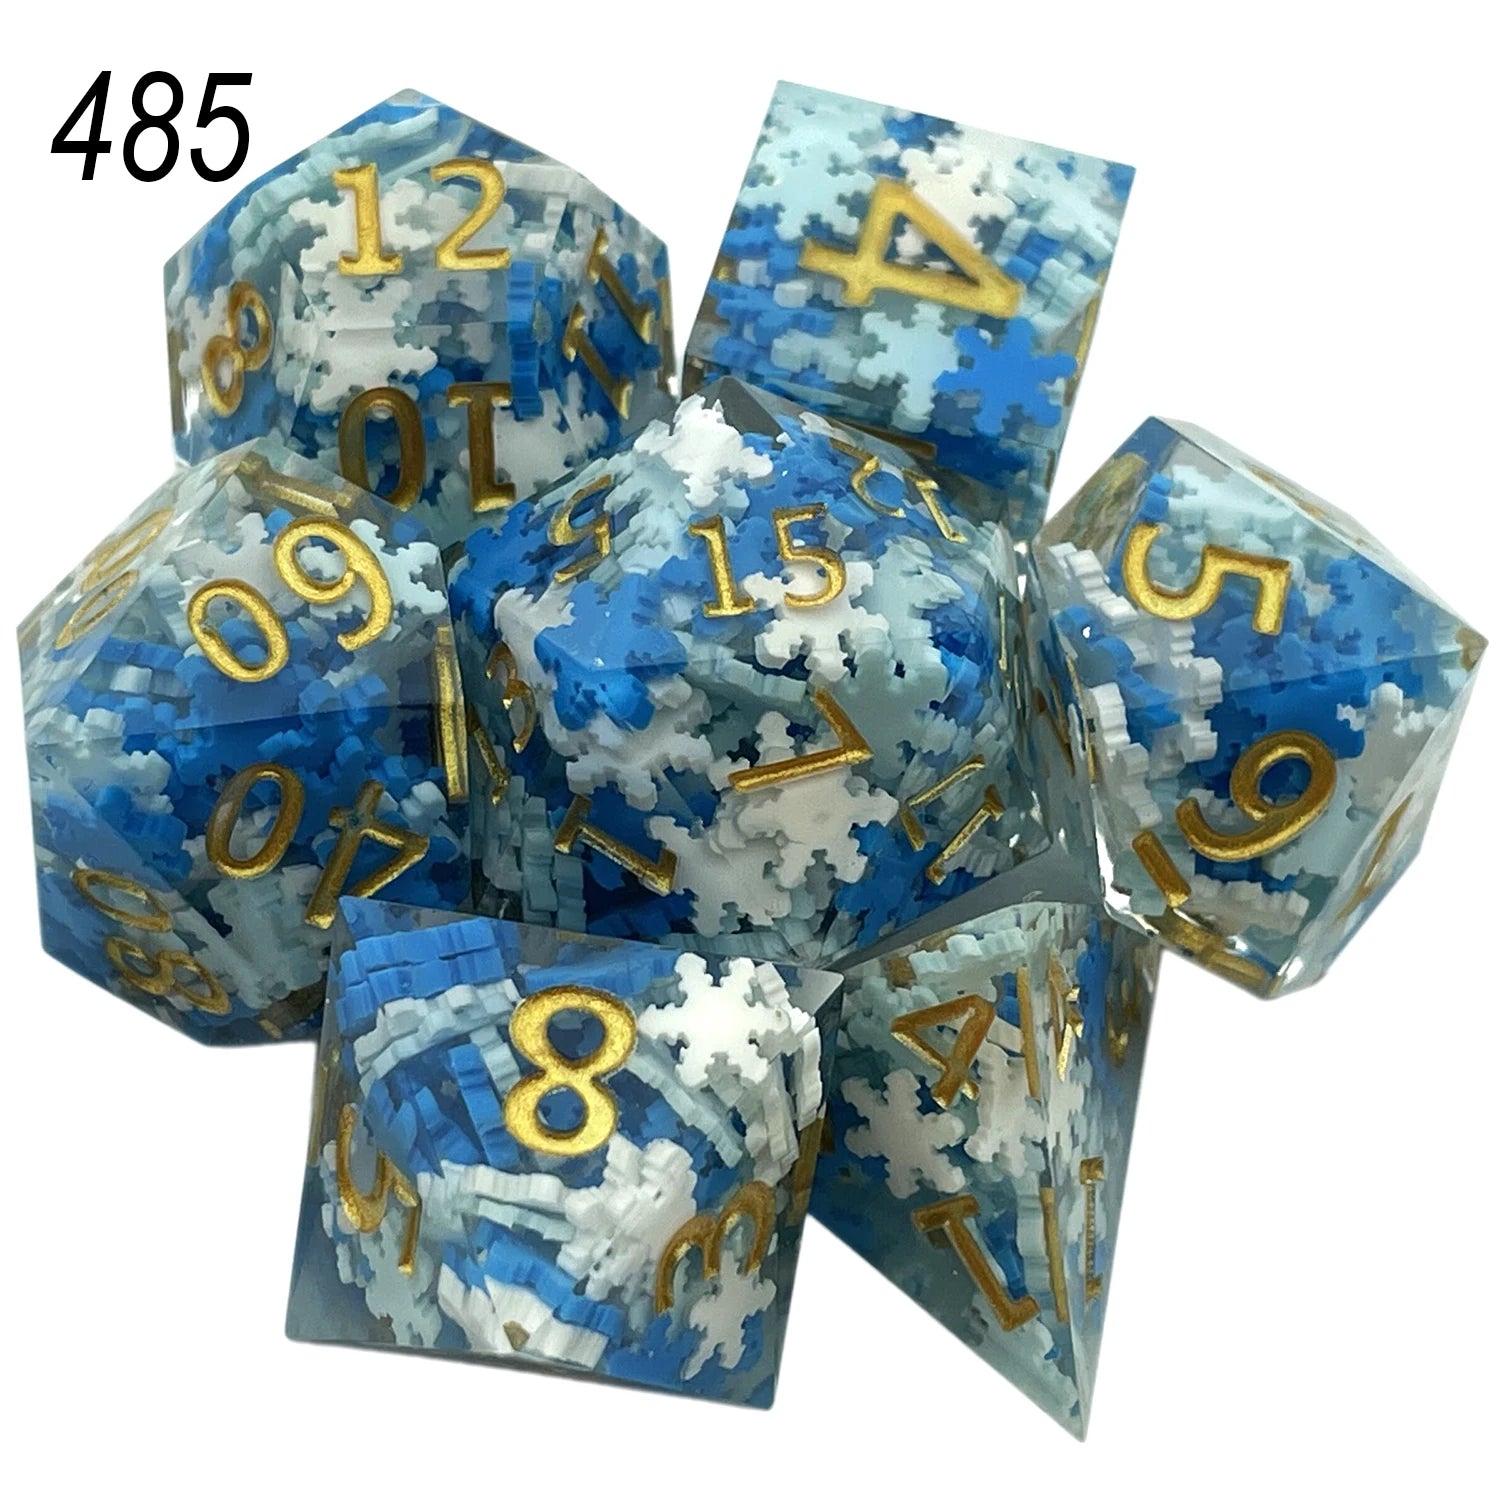 Solid Polyhedral Dice for Role Playing, Resin Dice, Dragon Scale, D, Rpg, Rol, Pathfinder, Board Game, Gifts, 7PCs, 2023 485